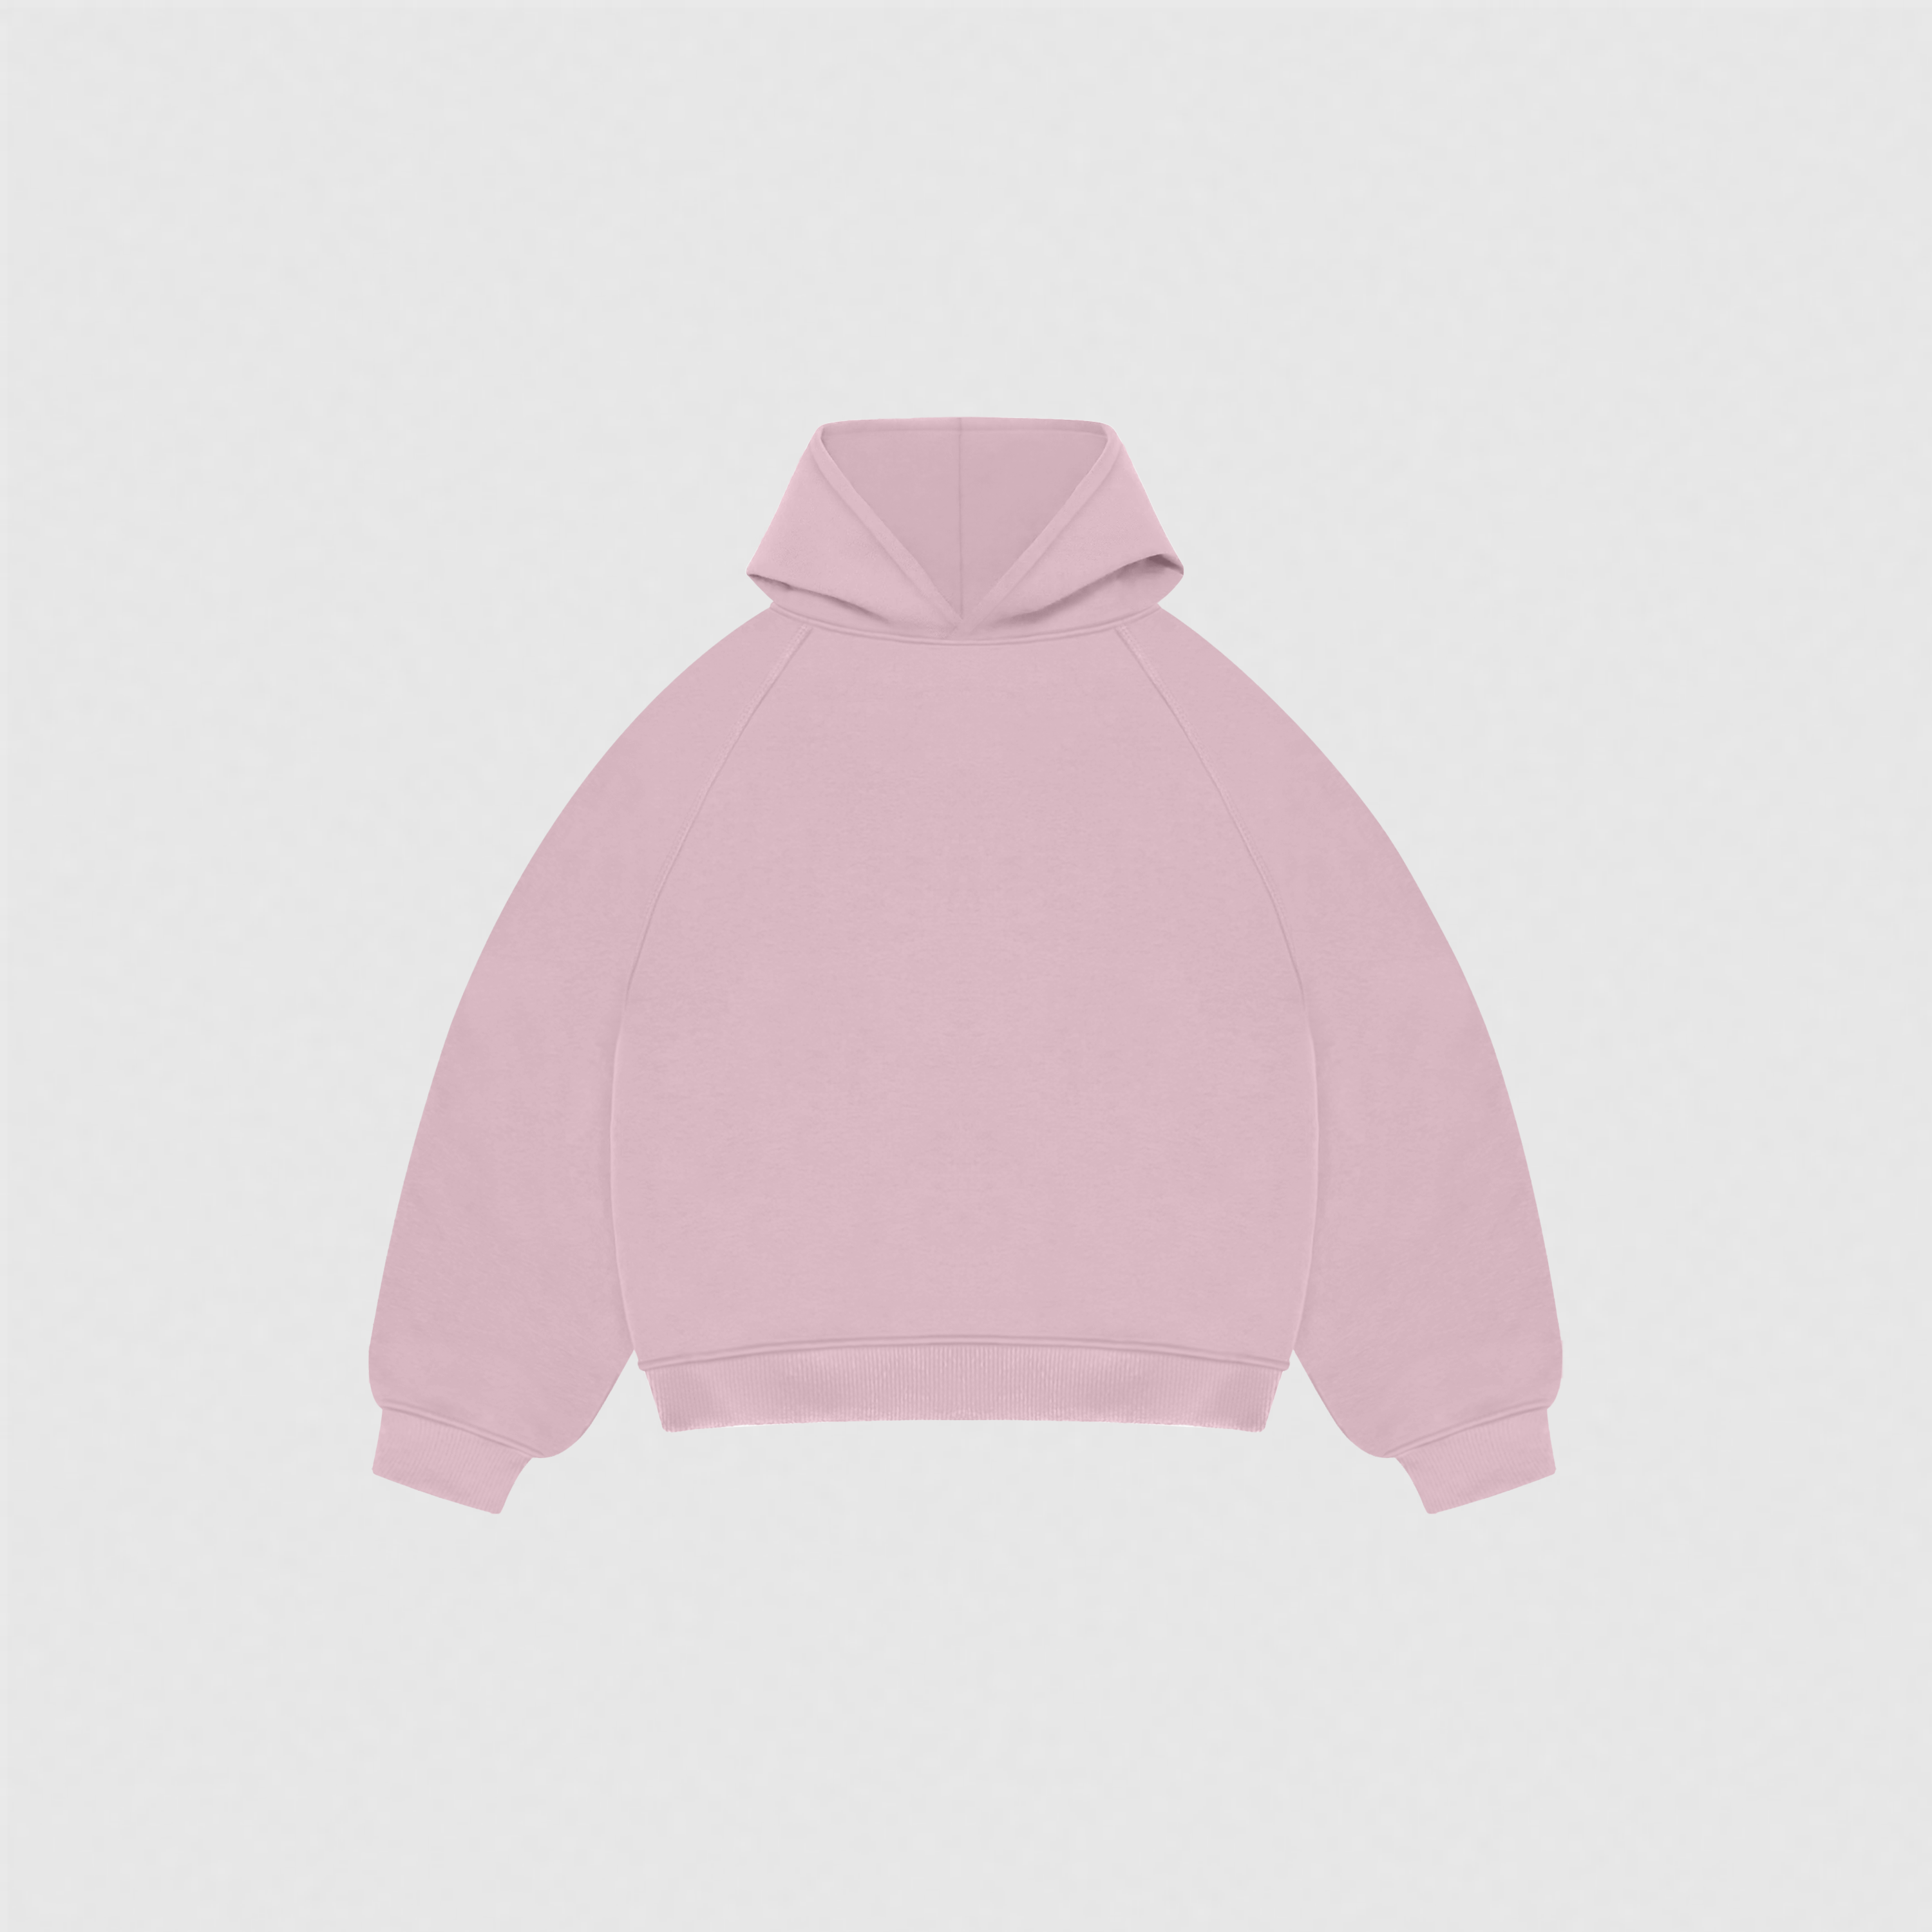 EVERYDAY GLAM PINK HOODIE-Hoodie-Lomalab-2X-SMALL-pink-Lomalab